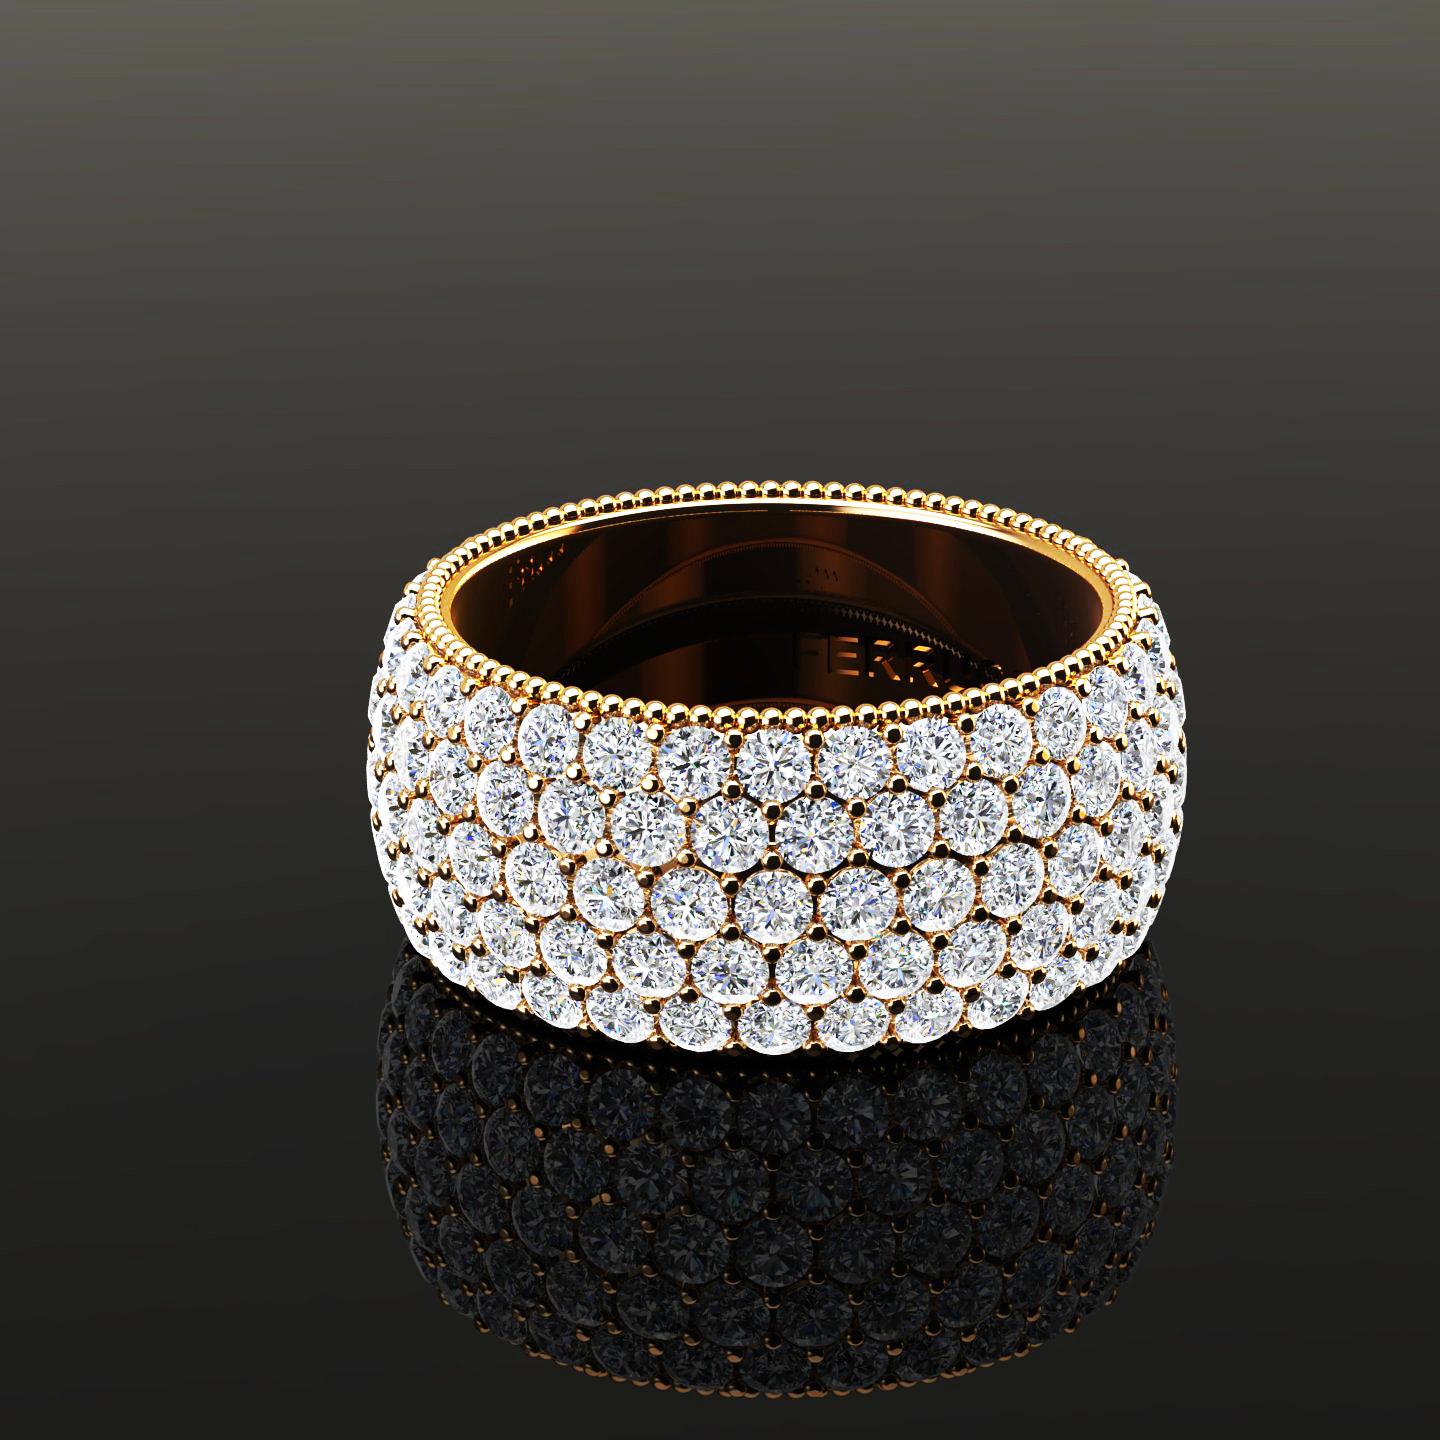 4.70 Carat Wide White Diamond Pave Ring in 18 Karat Yellow Gold In New Condition For Sale In New York, NY